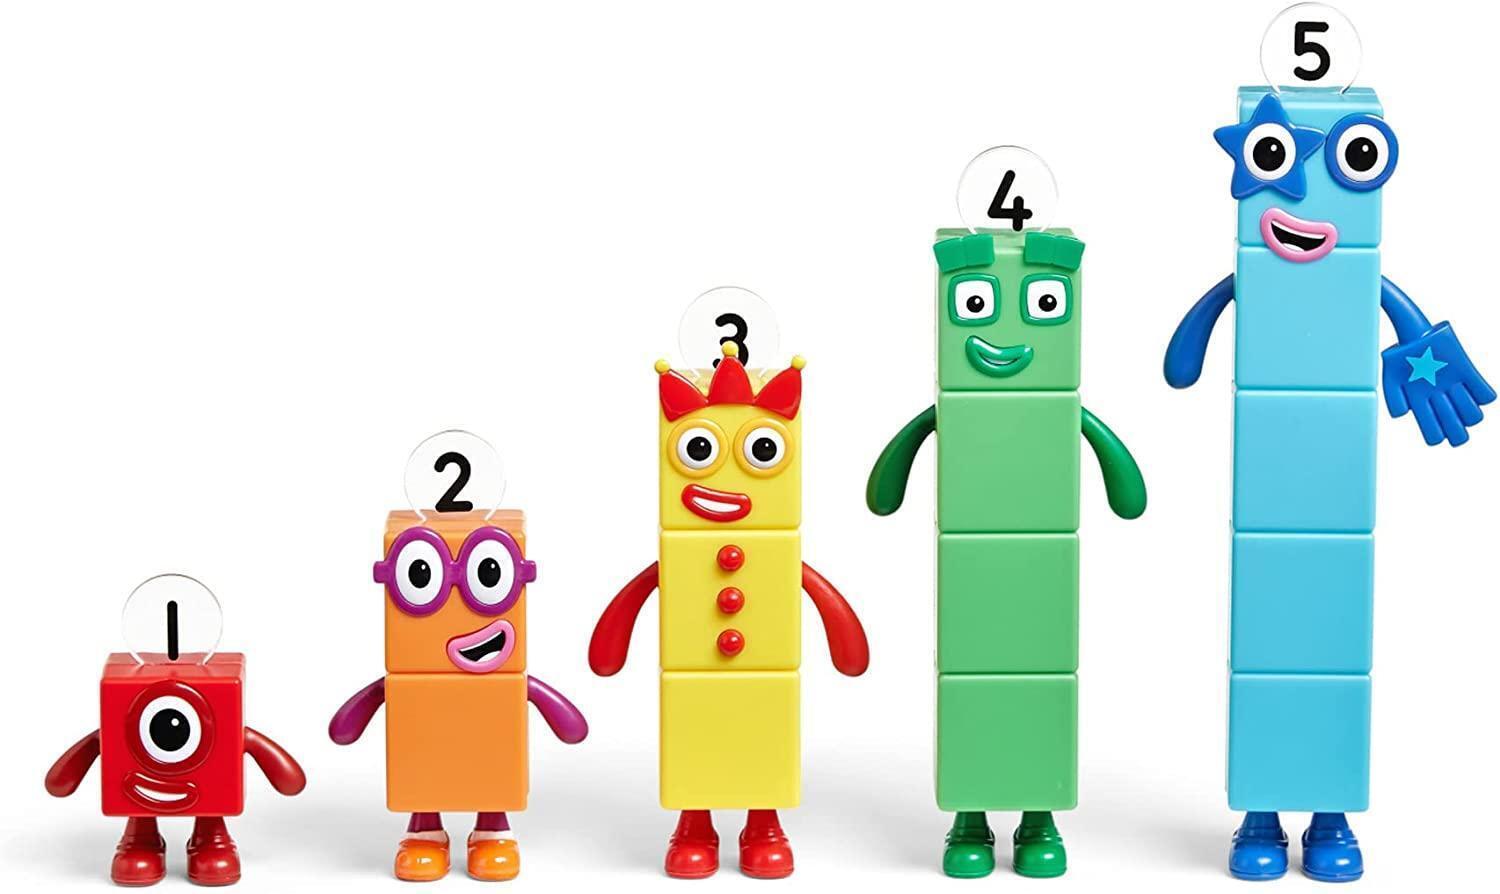 Learning Resources Numberblocks Friends One to Five